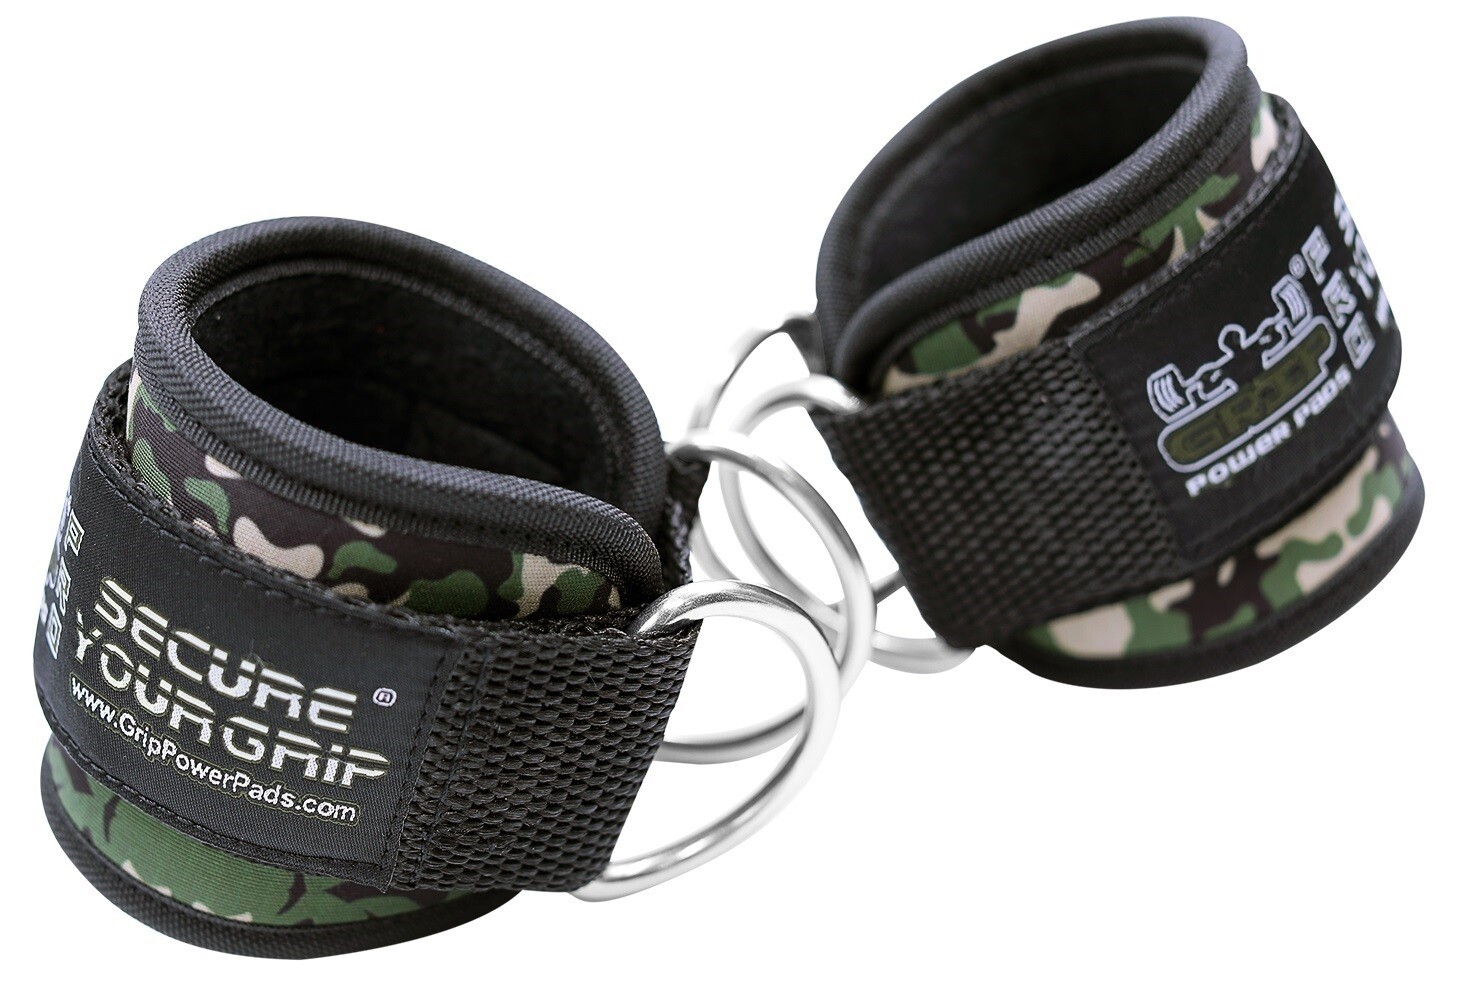 Camo Ankle Straps for Cable Machines Double D-Ring Adjustable Neoprene Premium Cuffs to Enhance Legs, Abs & Glutes For Men & Women